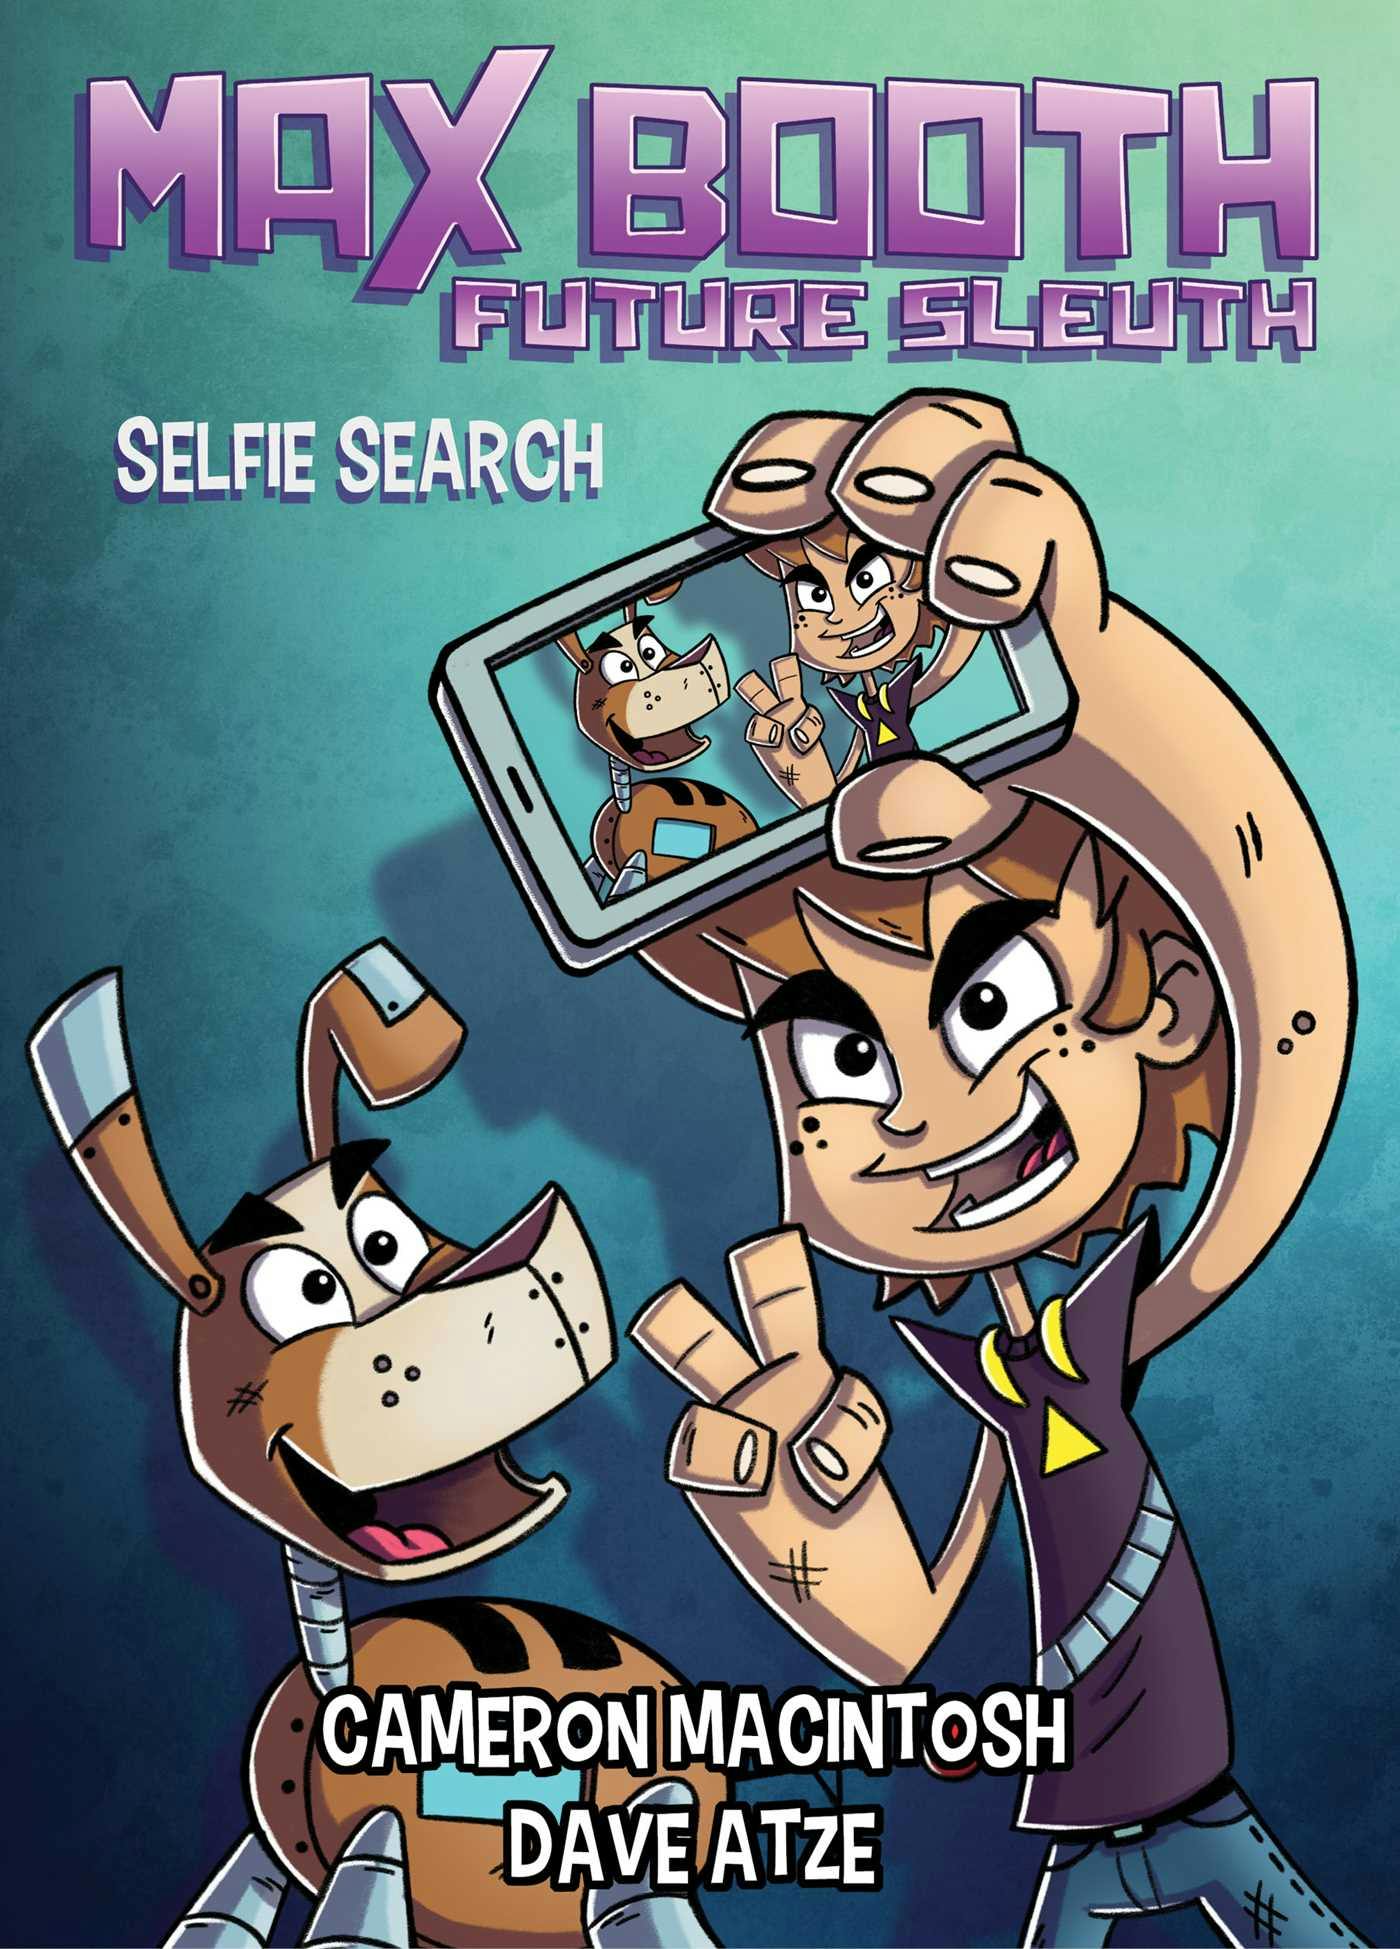 Max Booth Future Sleuth: Selfie Search - Cameron Macintosh